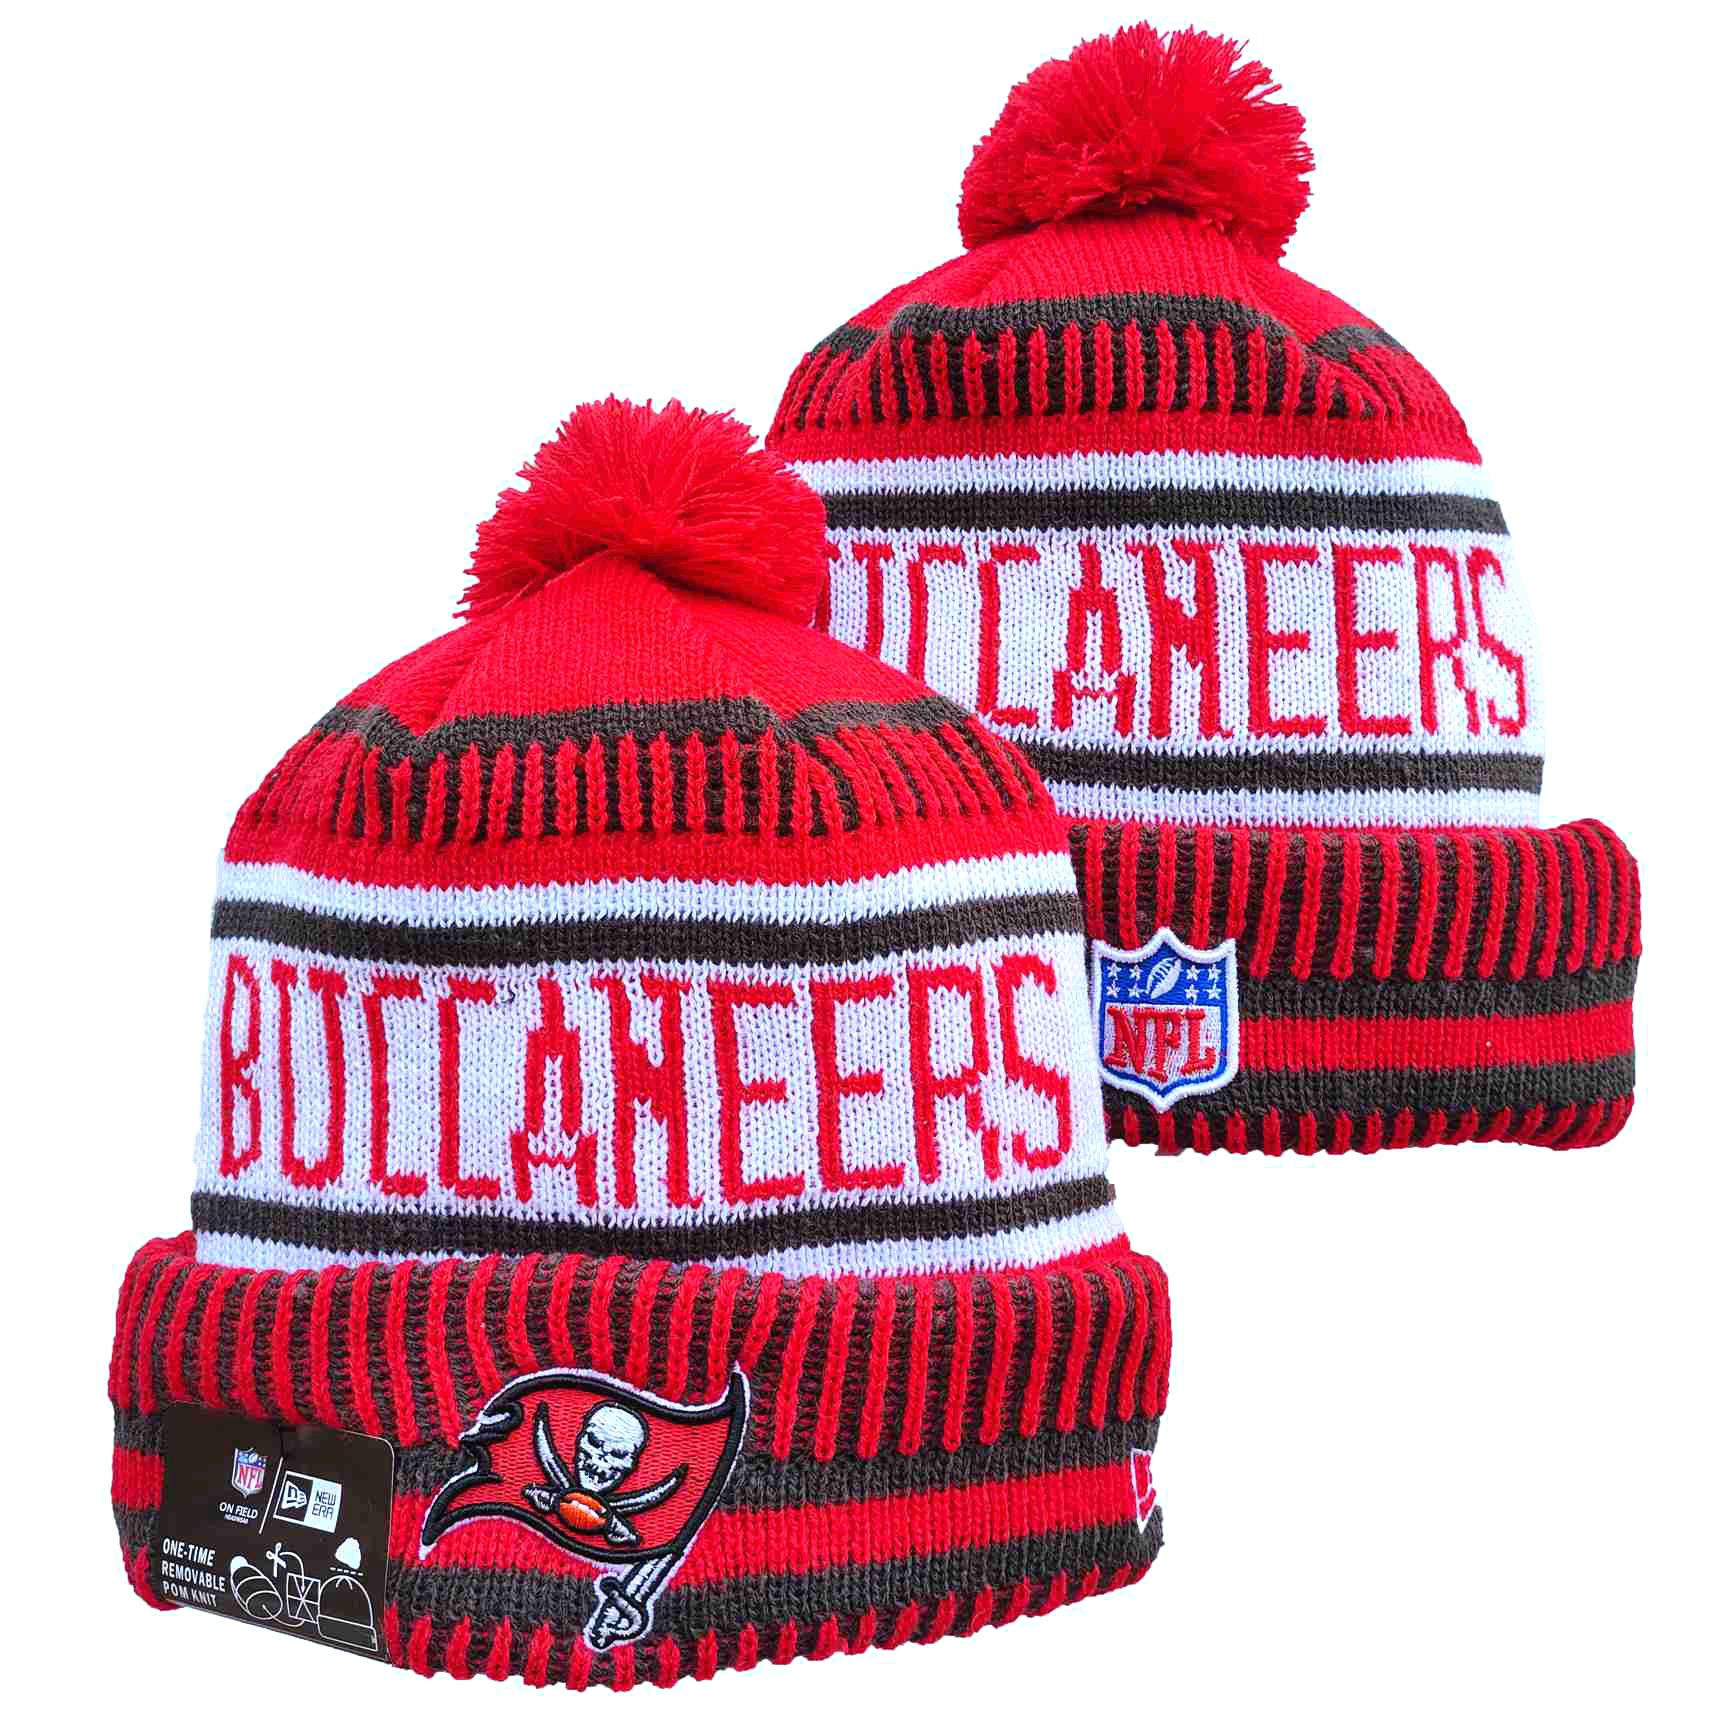 Tampa Bay Buccaneers Knit Hats -19